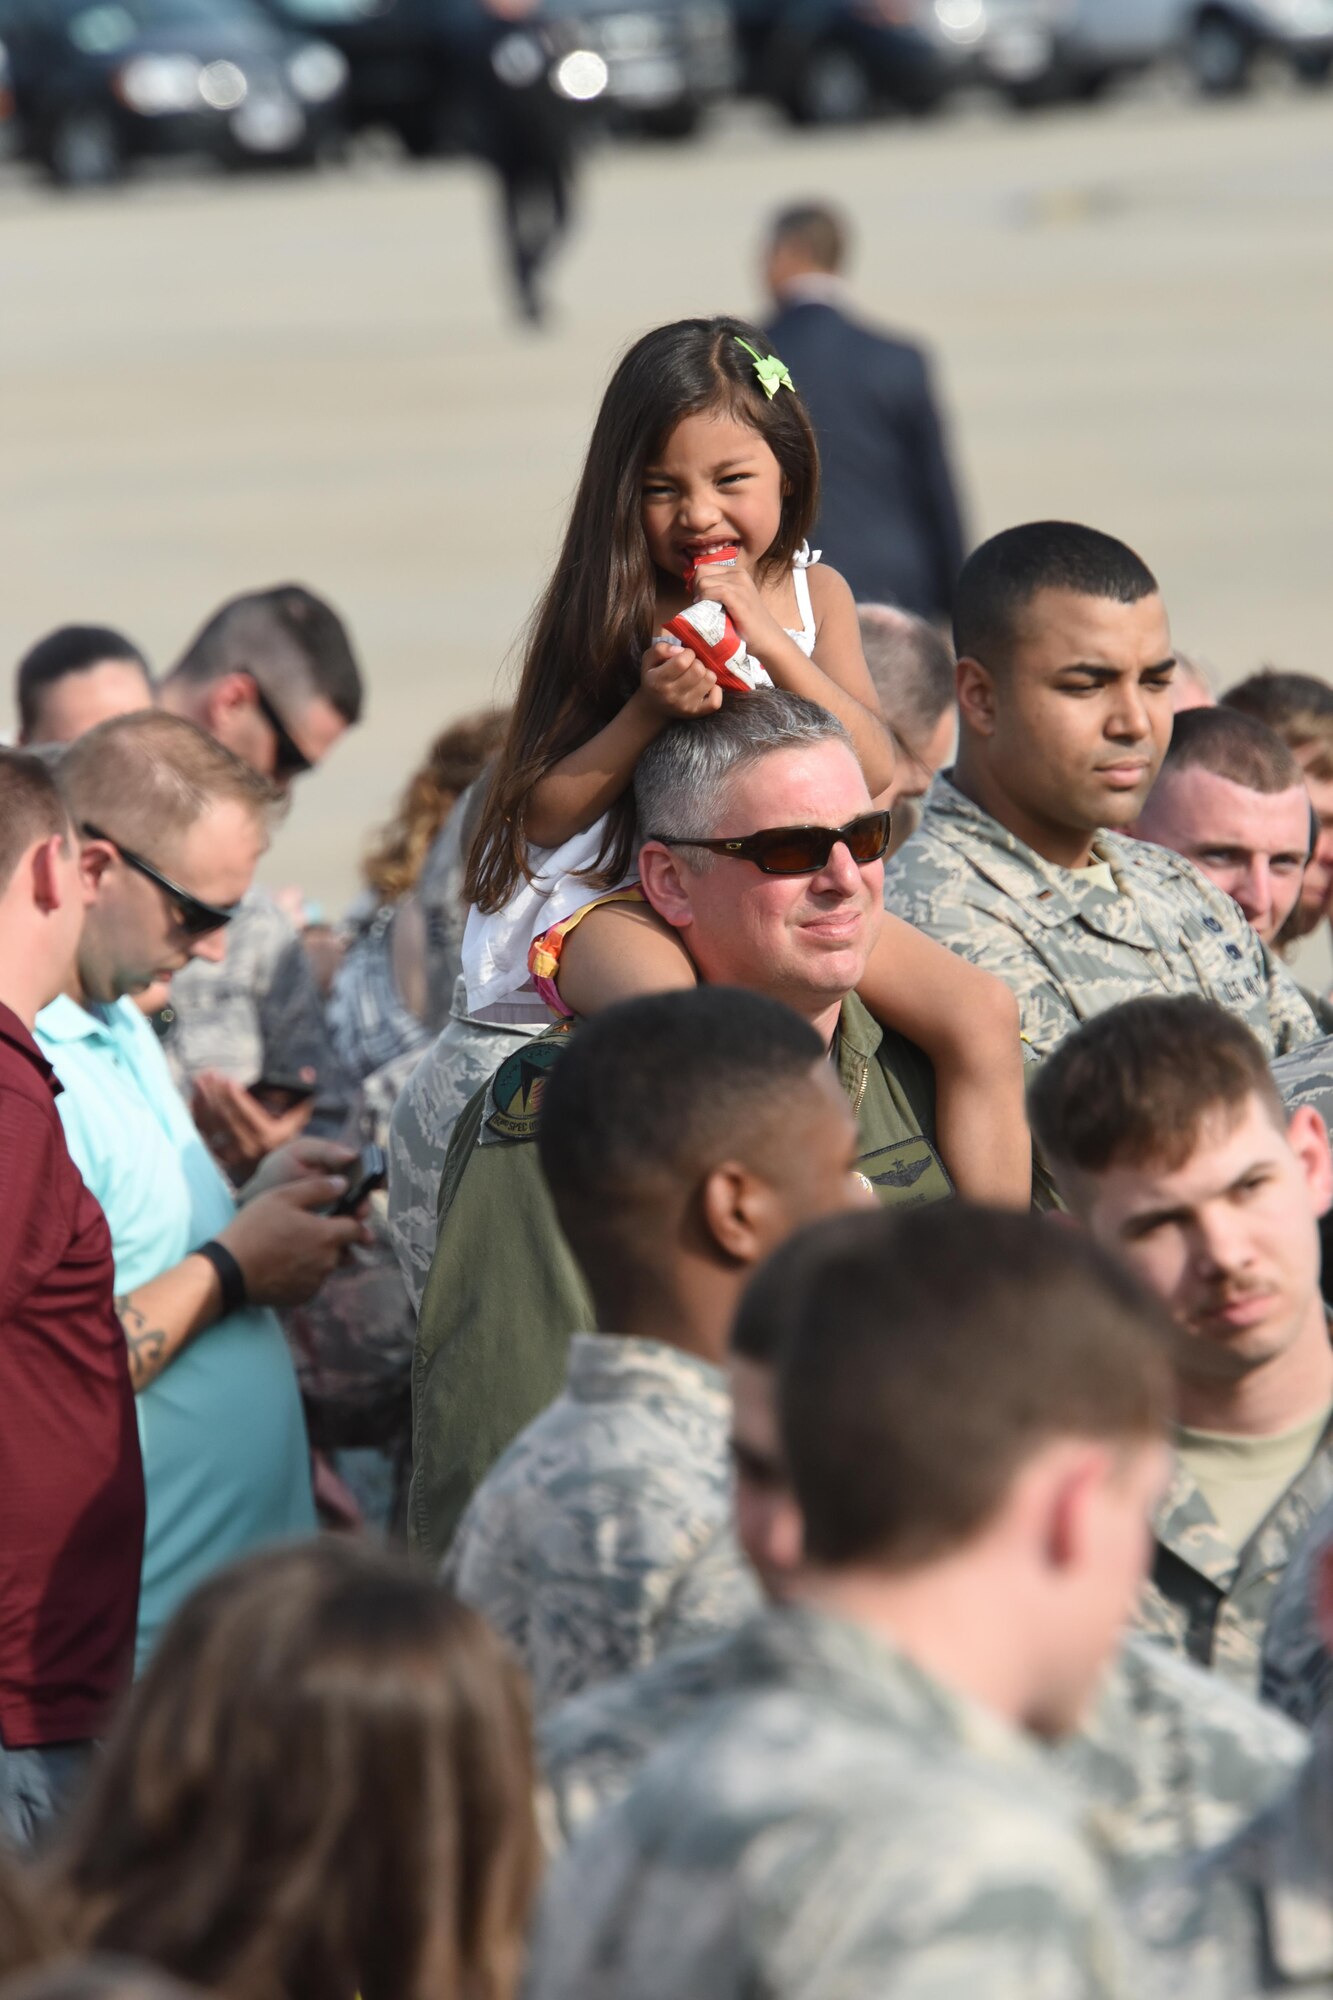 193rd Special Operations Wing Airmen, along with their family and friends, watch the arrival of Vice President Mike Pence, Middletown, Pennsylvania, April 29, 2017. The vice president and President Donald J. Trump; who arrived after the vice president; took time to shake the hands of Airmen, along with Airmen’s family and friends before departing for the Harrisburg Farm Show Complex for President Trump’s 100th day rally. (U.S. Air National Guard Photo by Master Sgt. Culeen Shaffer/Released)